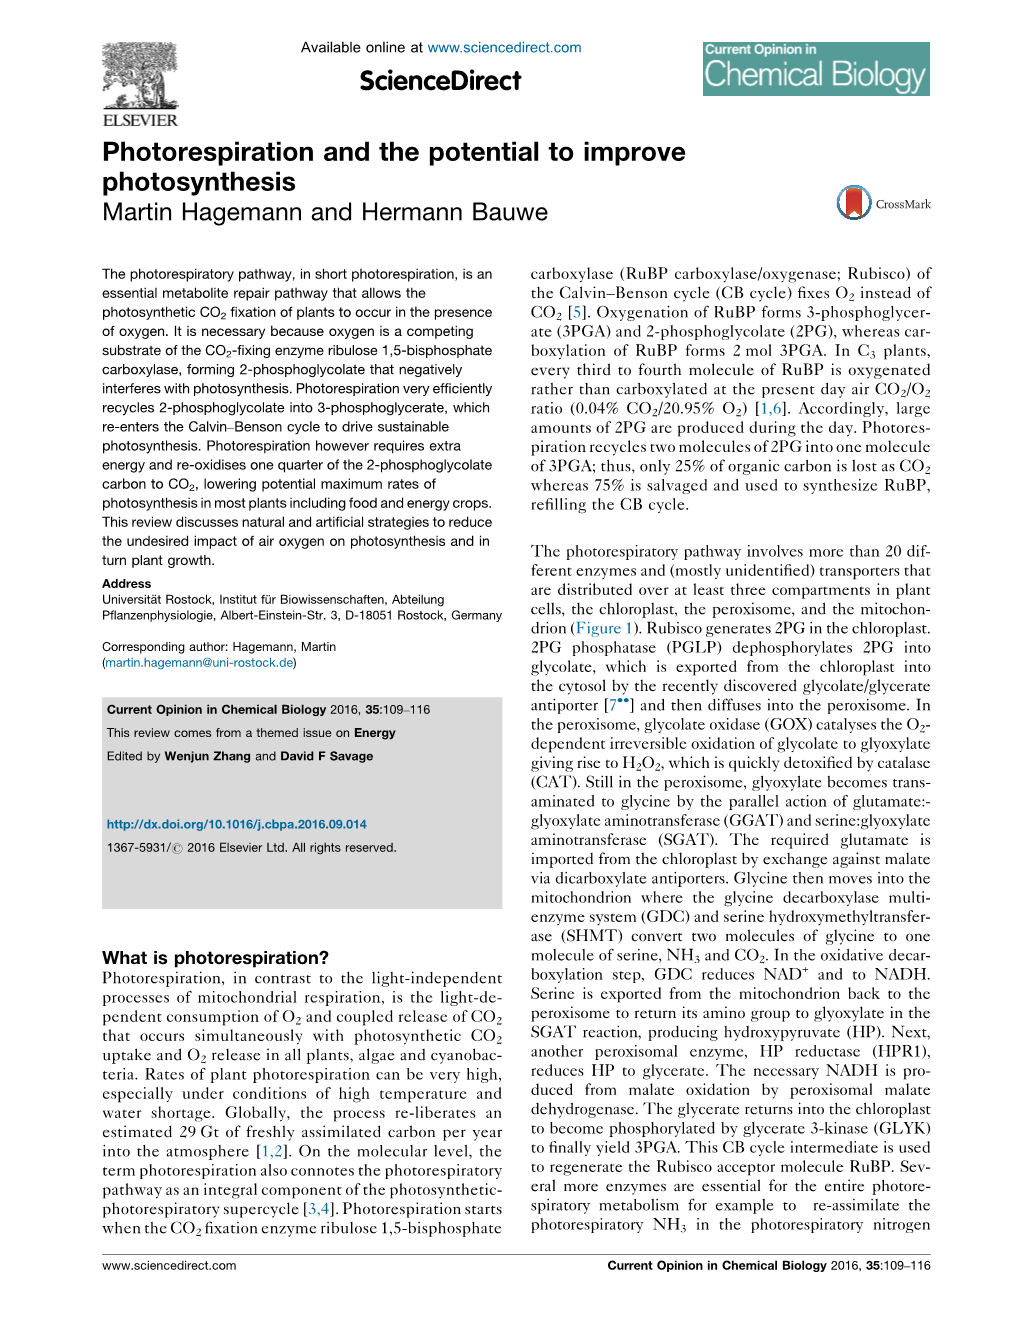 Photorespiration and the Potential to Improve Photosynthesis Hagemann and Bauwe 111